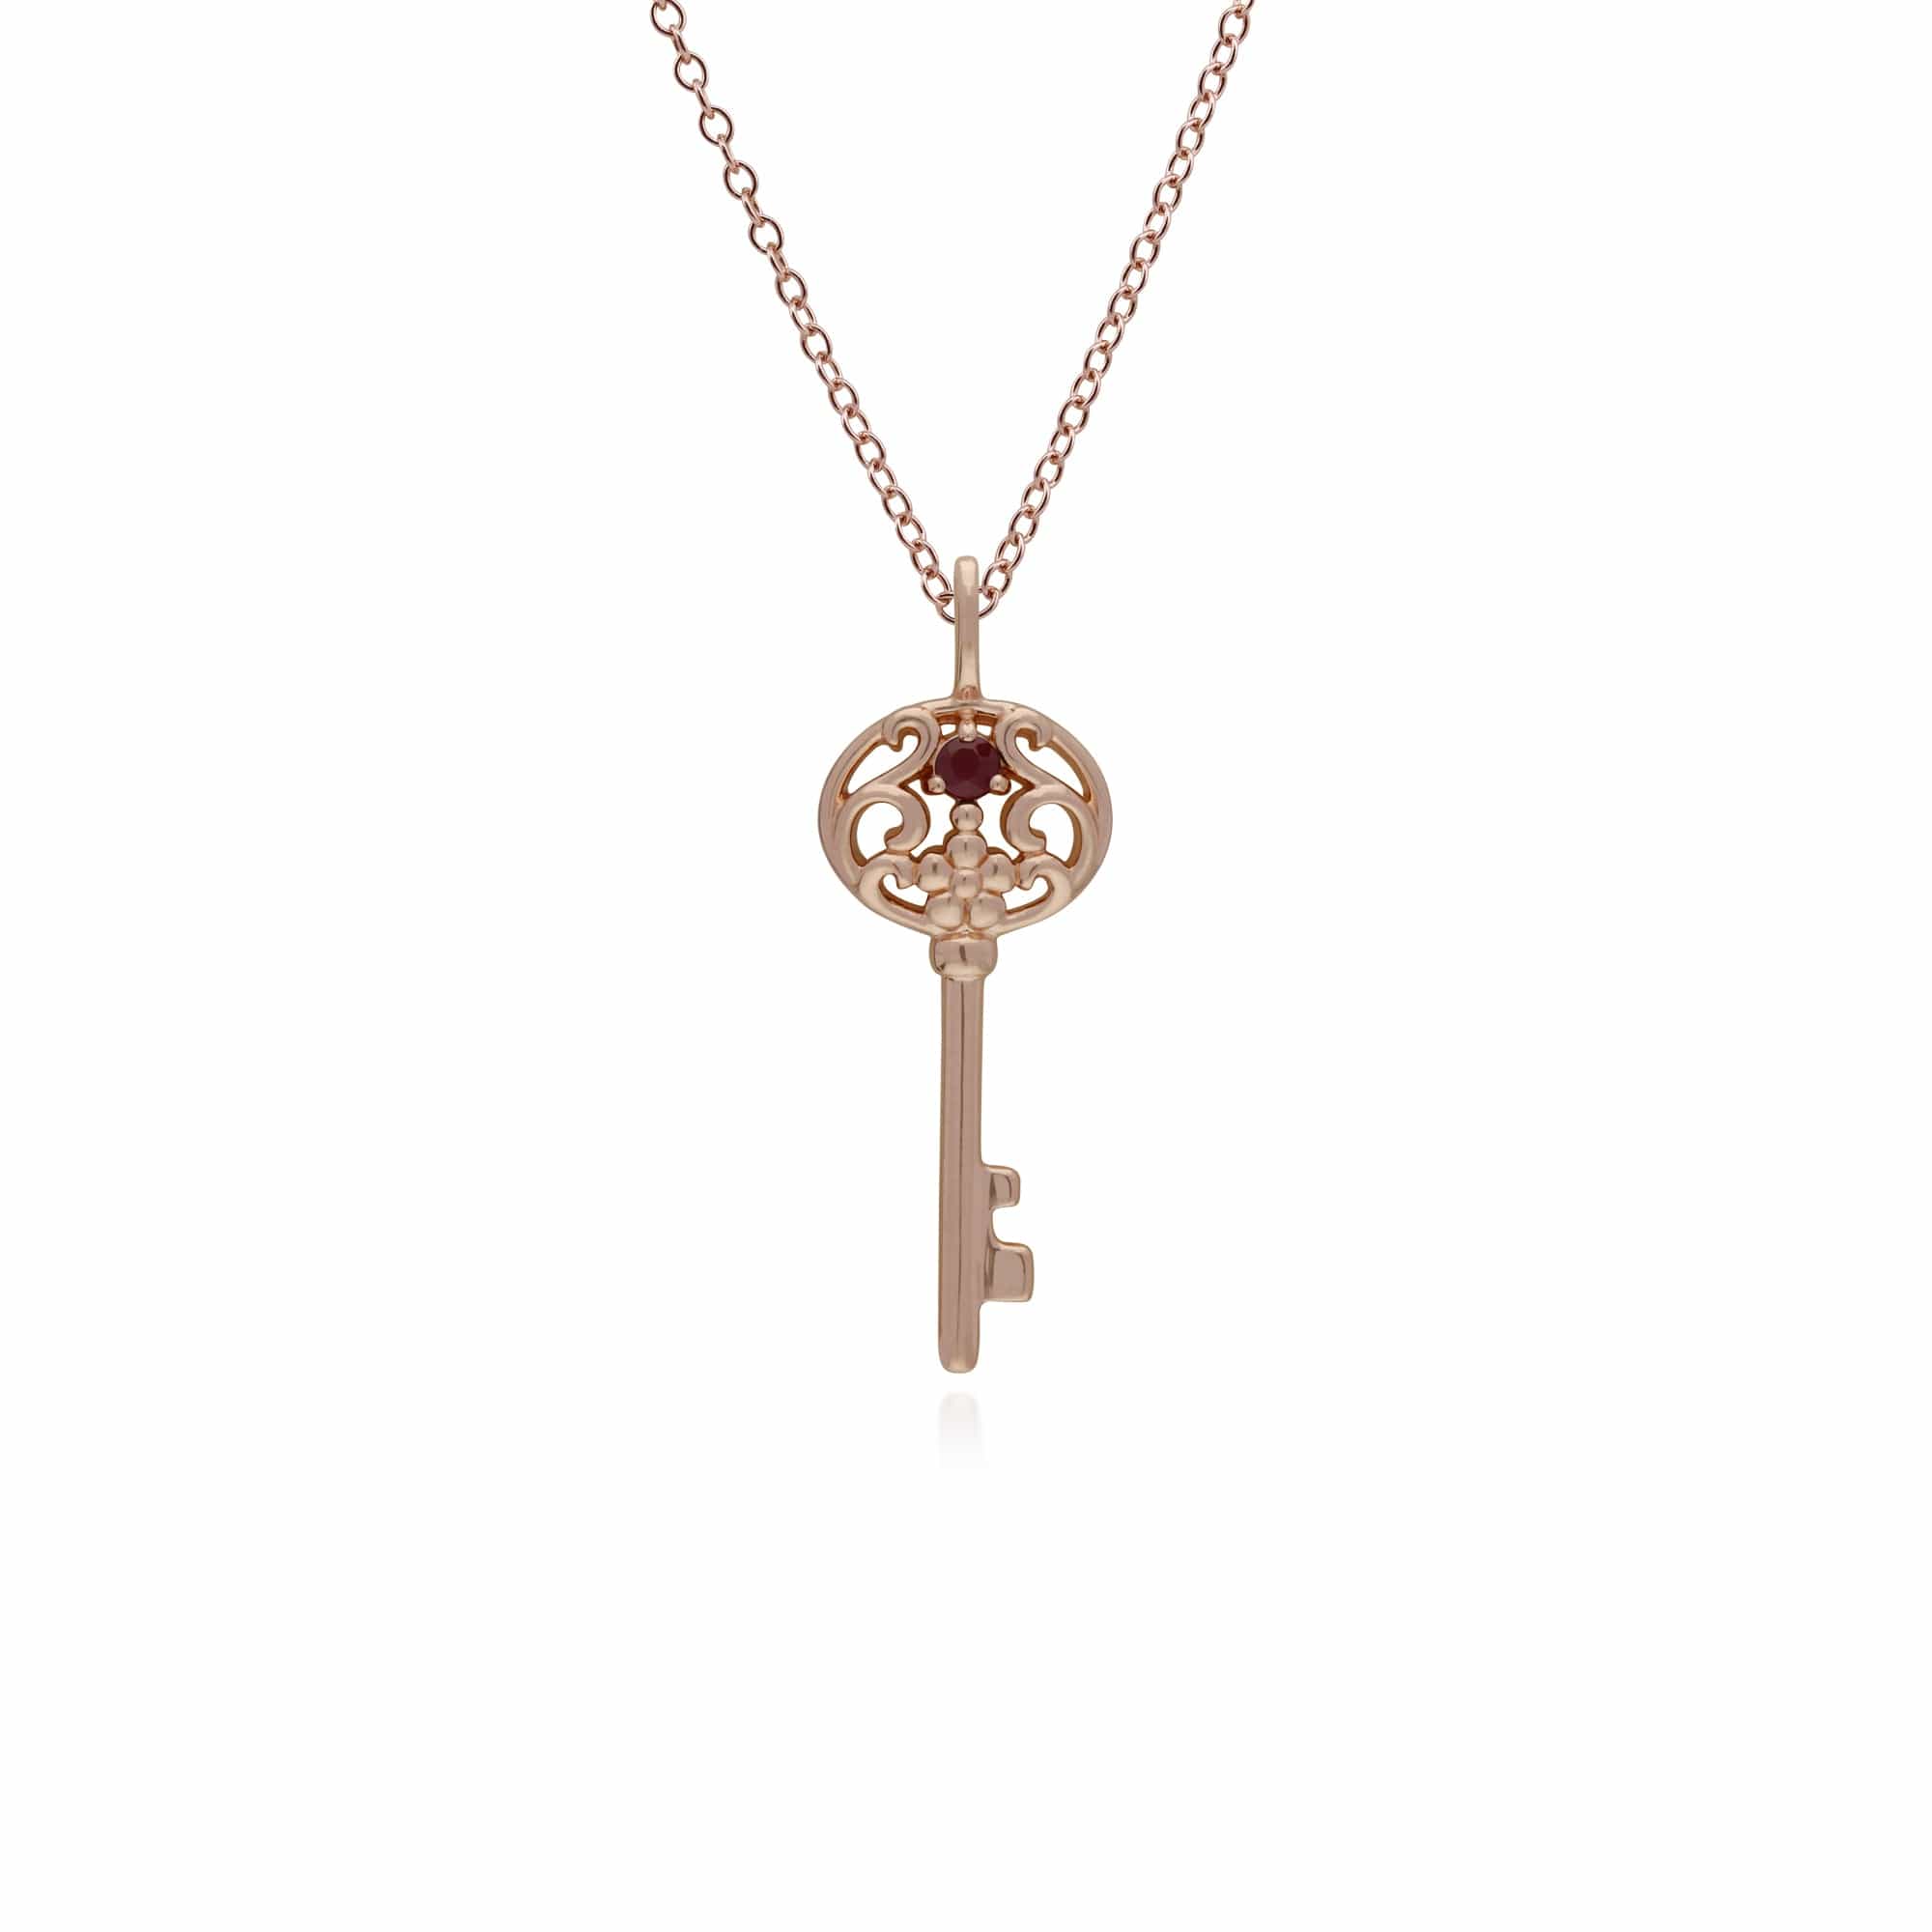 270P026703925-270P026501925 Classic Swirl Heart Lock Pendant & Ruby Big Key Charm in Rose Gold Plated 925 Sterling Silver 2